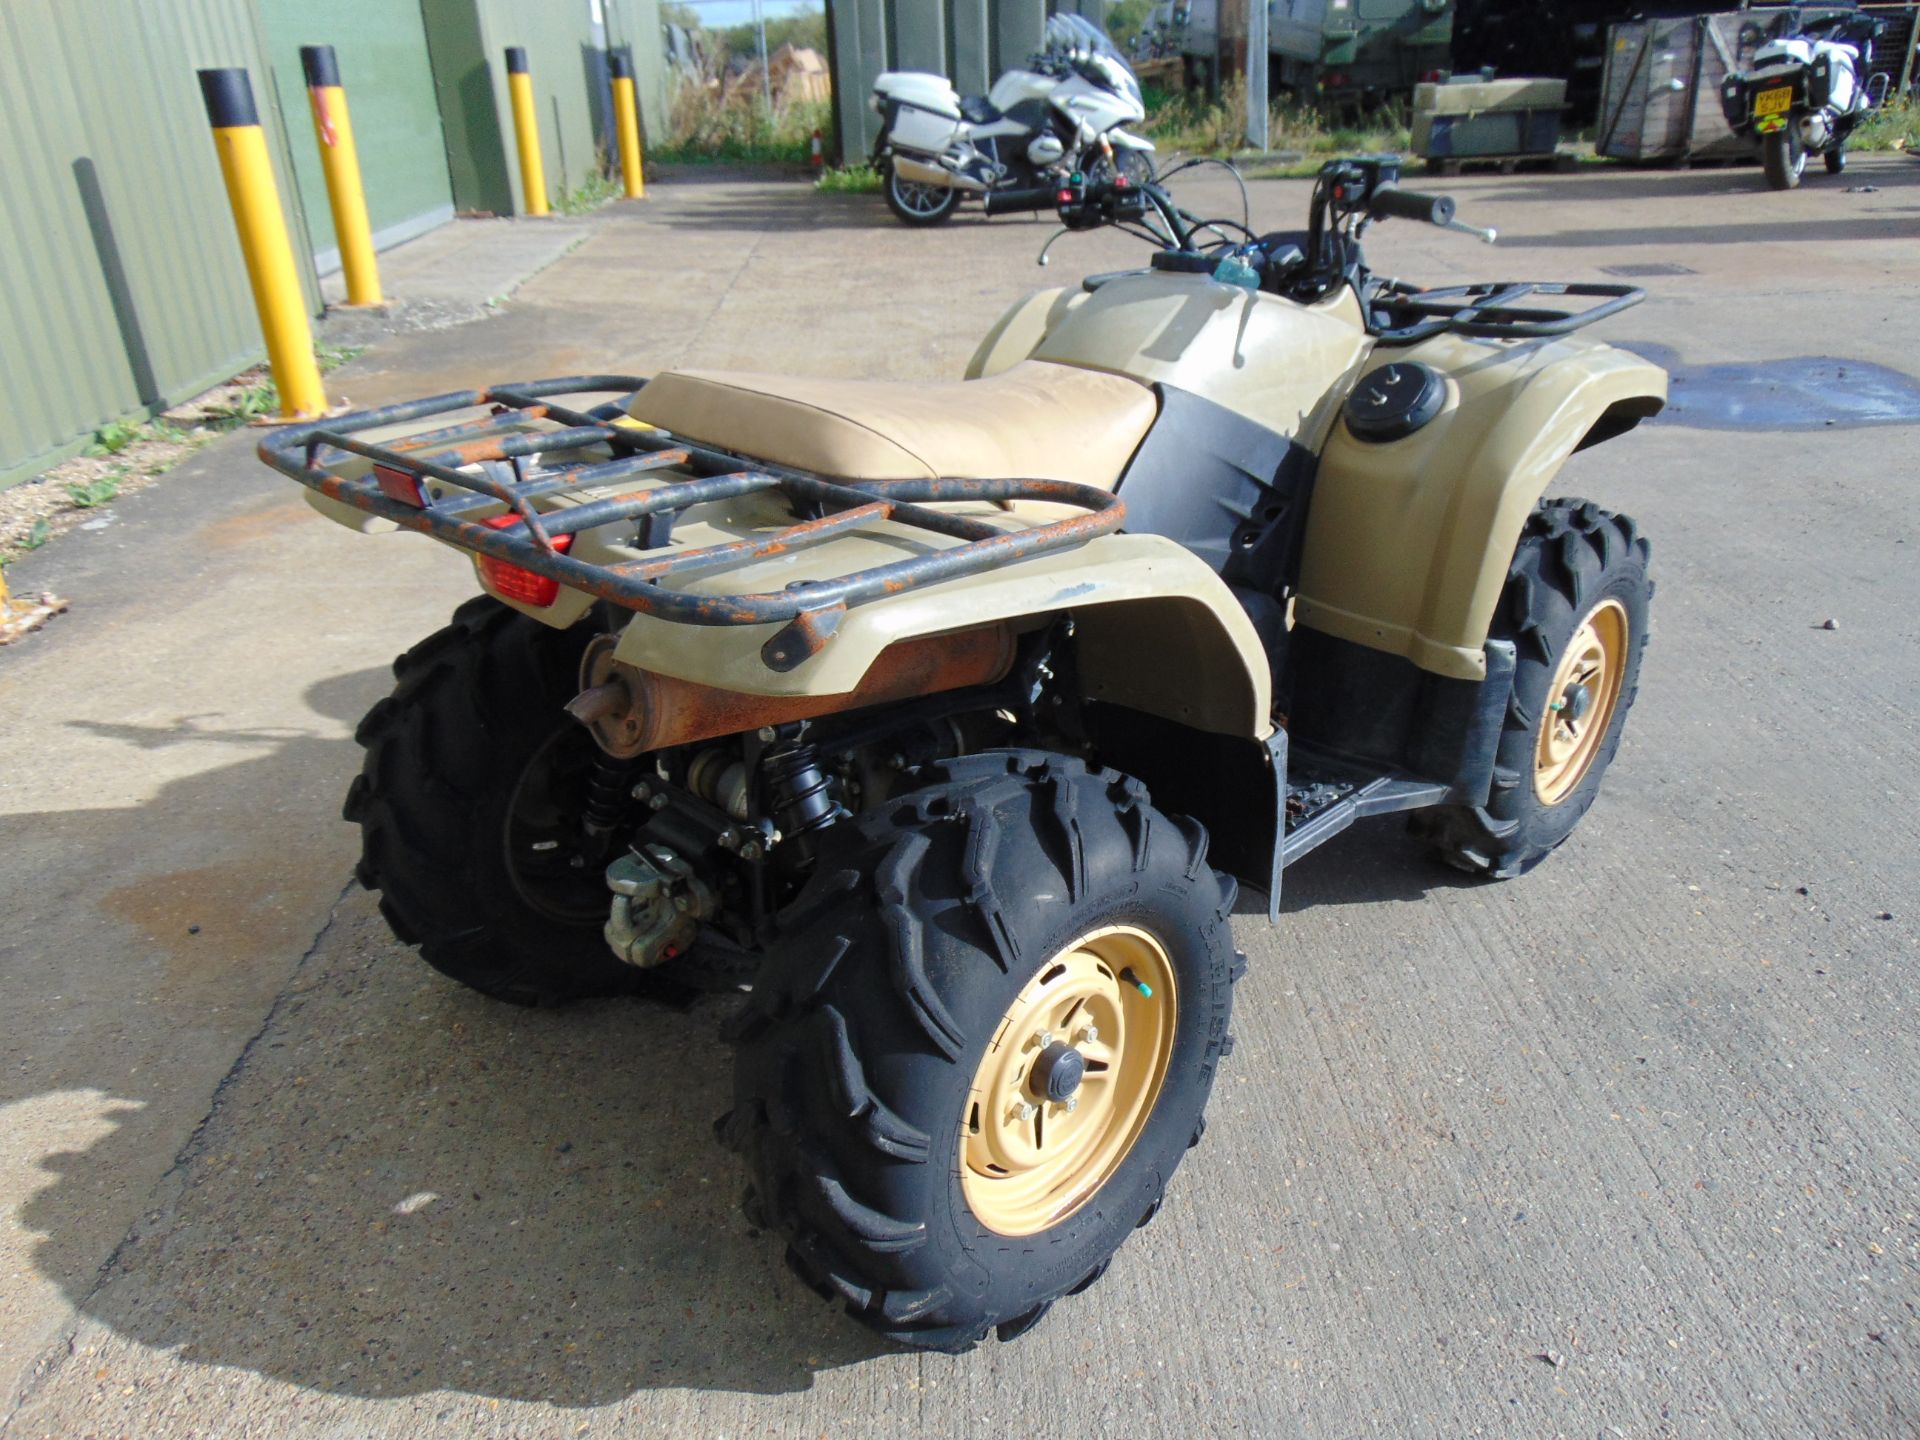 Military Specification Yamaha Grizzly 450 4 x 4 ATV Quad Bike - Image 6 of 14